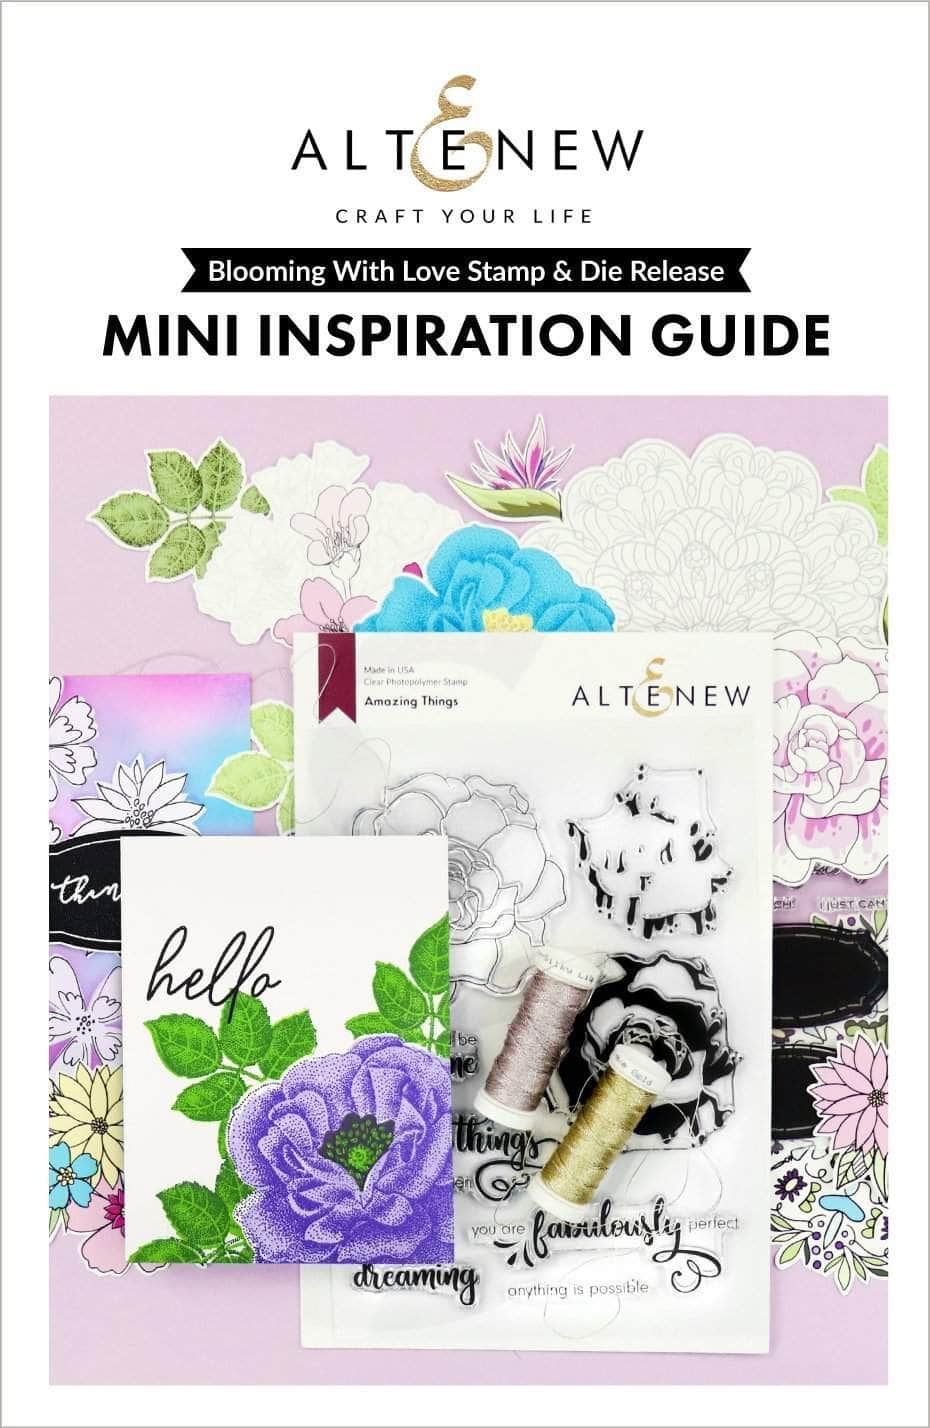 Printed Media Blooming With Love Stamp & Die Release Mini Inspiration Guide